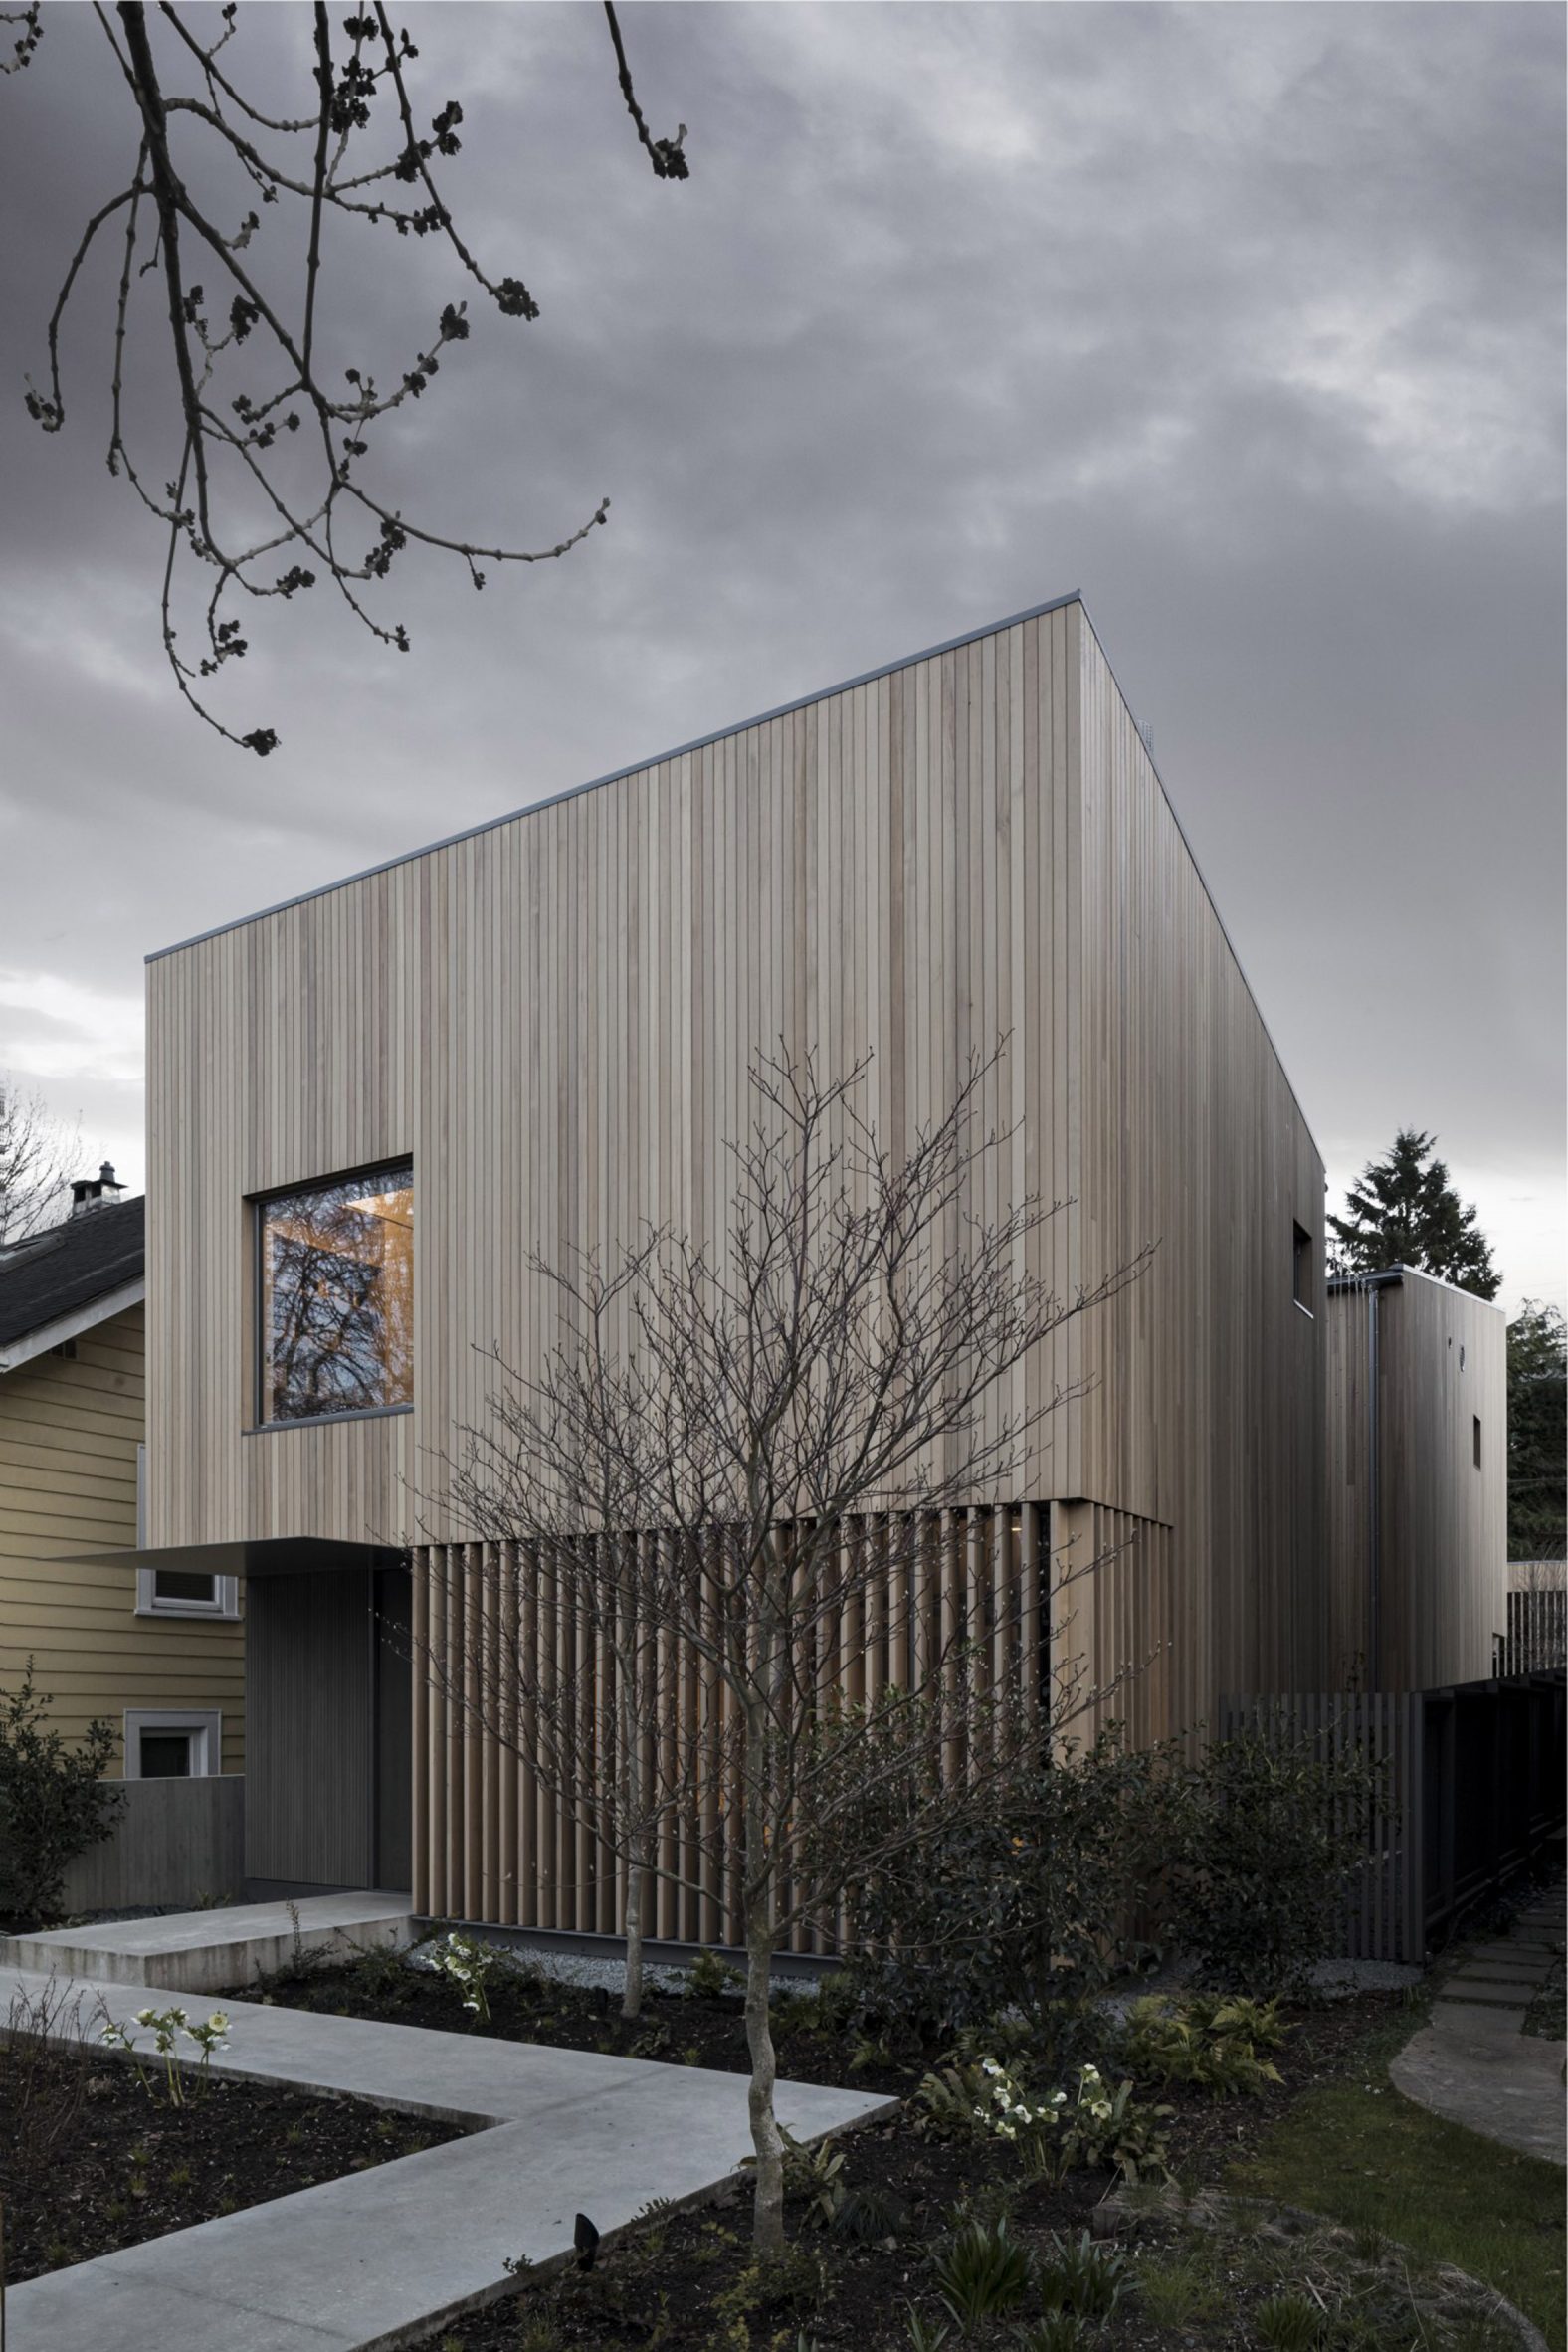 The boxy shaped Courtyard House in Vancouver